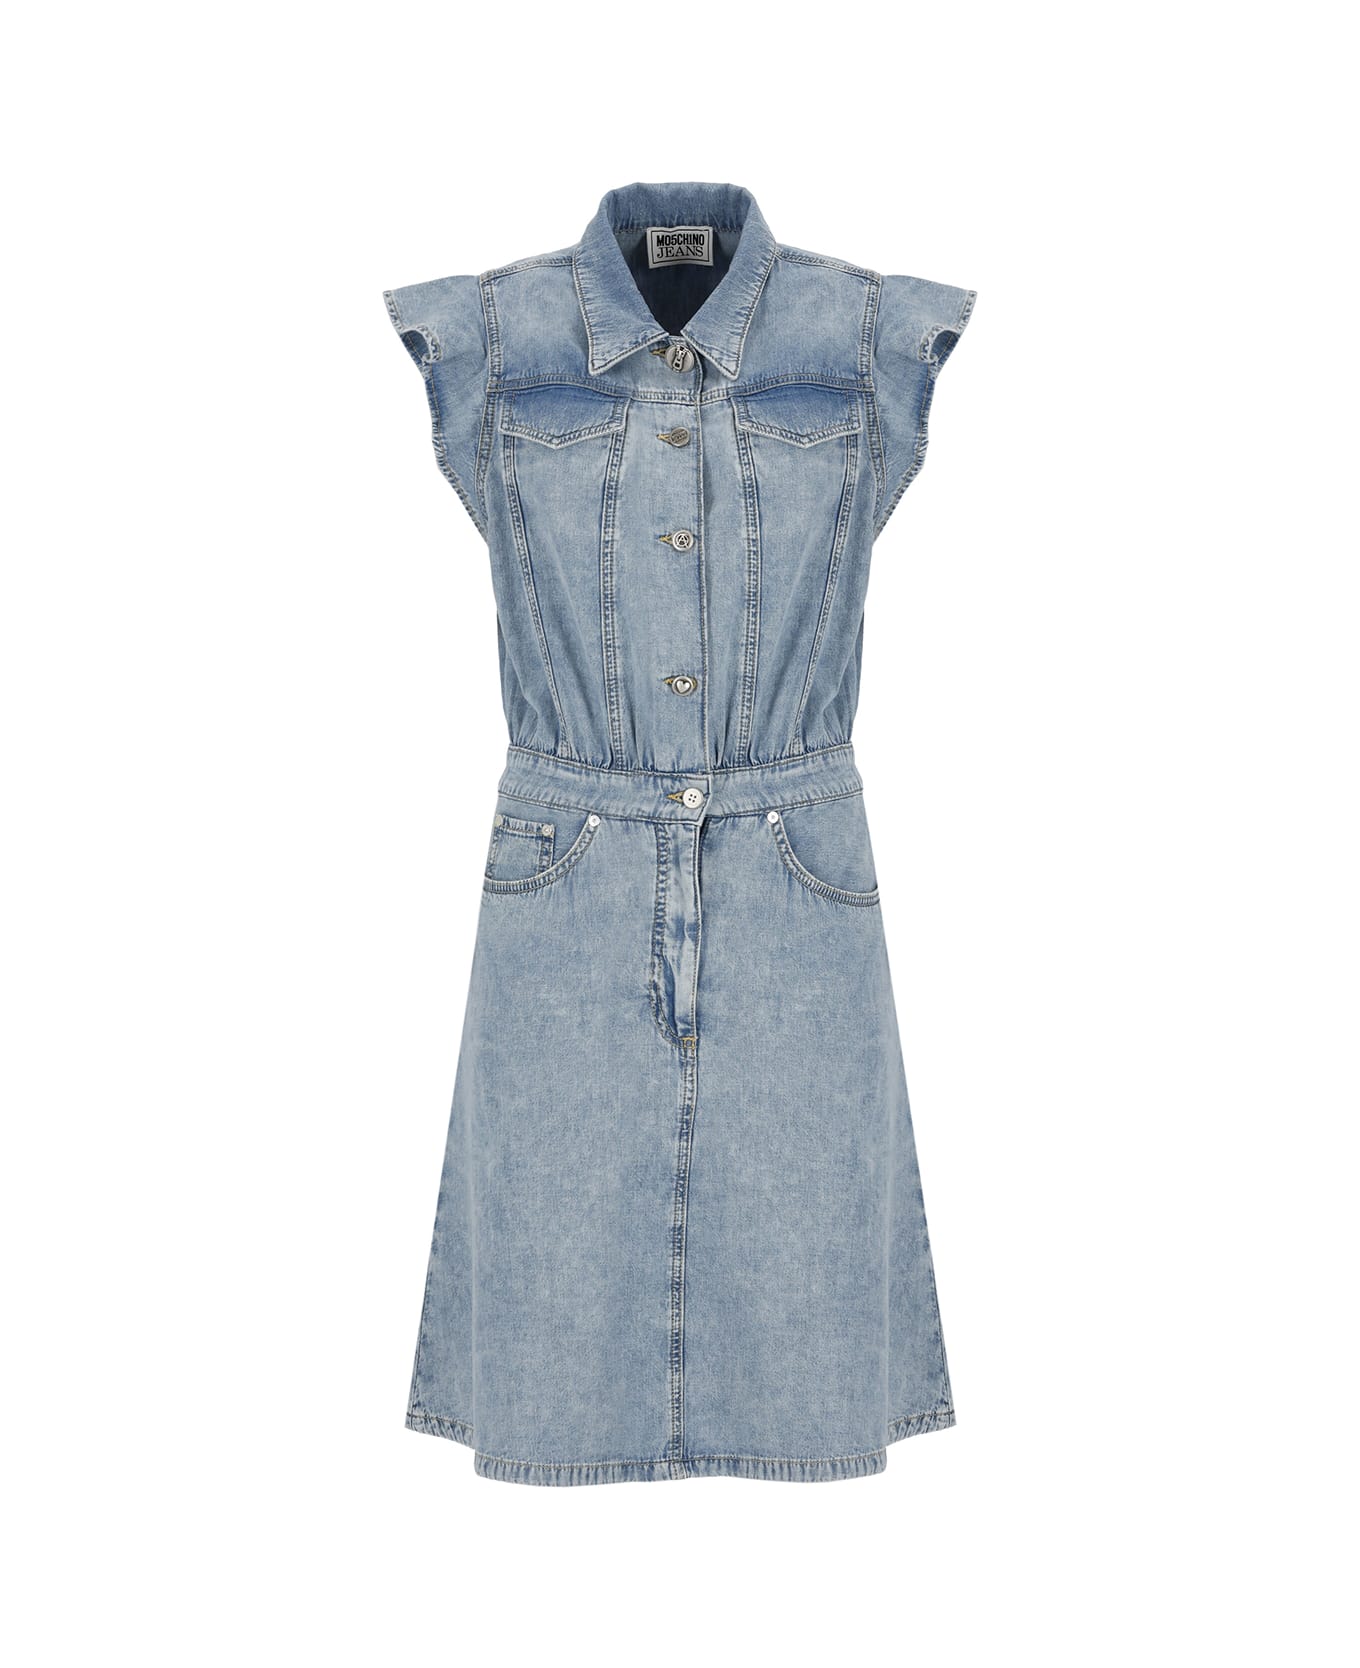 M05CH1N0 Jeans Cotton Dress - Stone Washed ワンピース＆ドレス